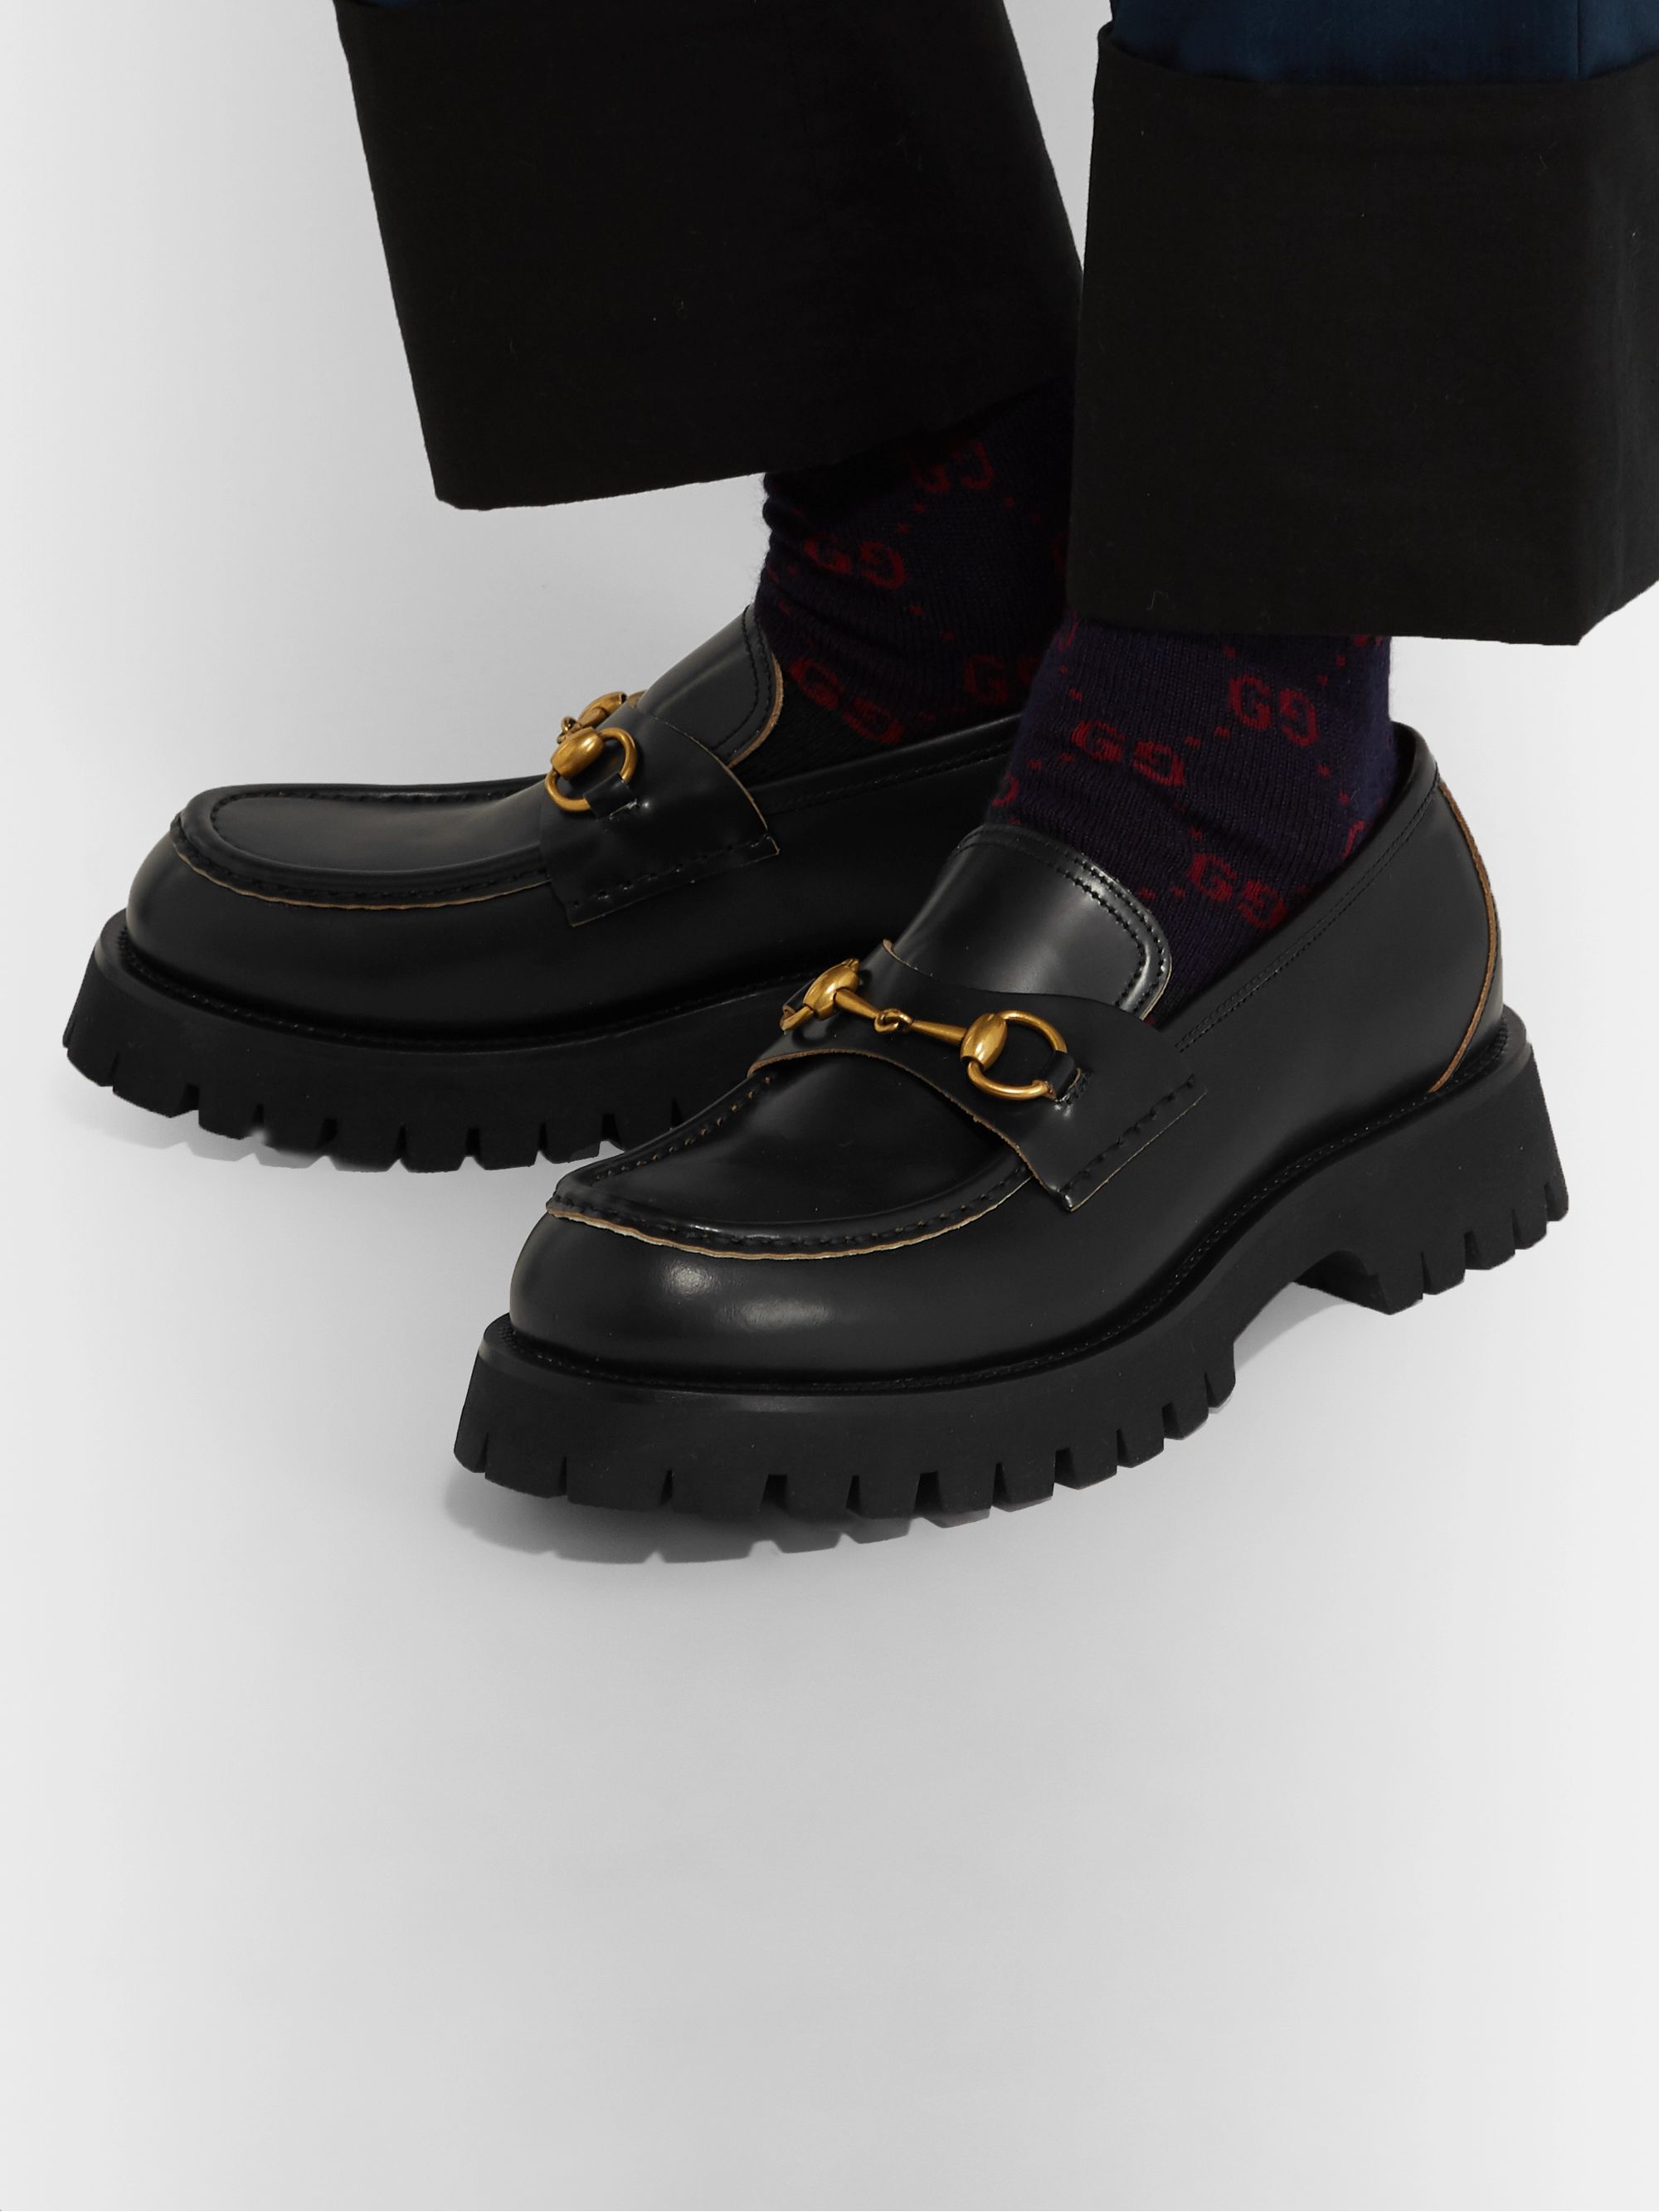 Black Horsebit Leather Loafers | GUCCI 